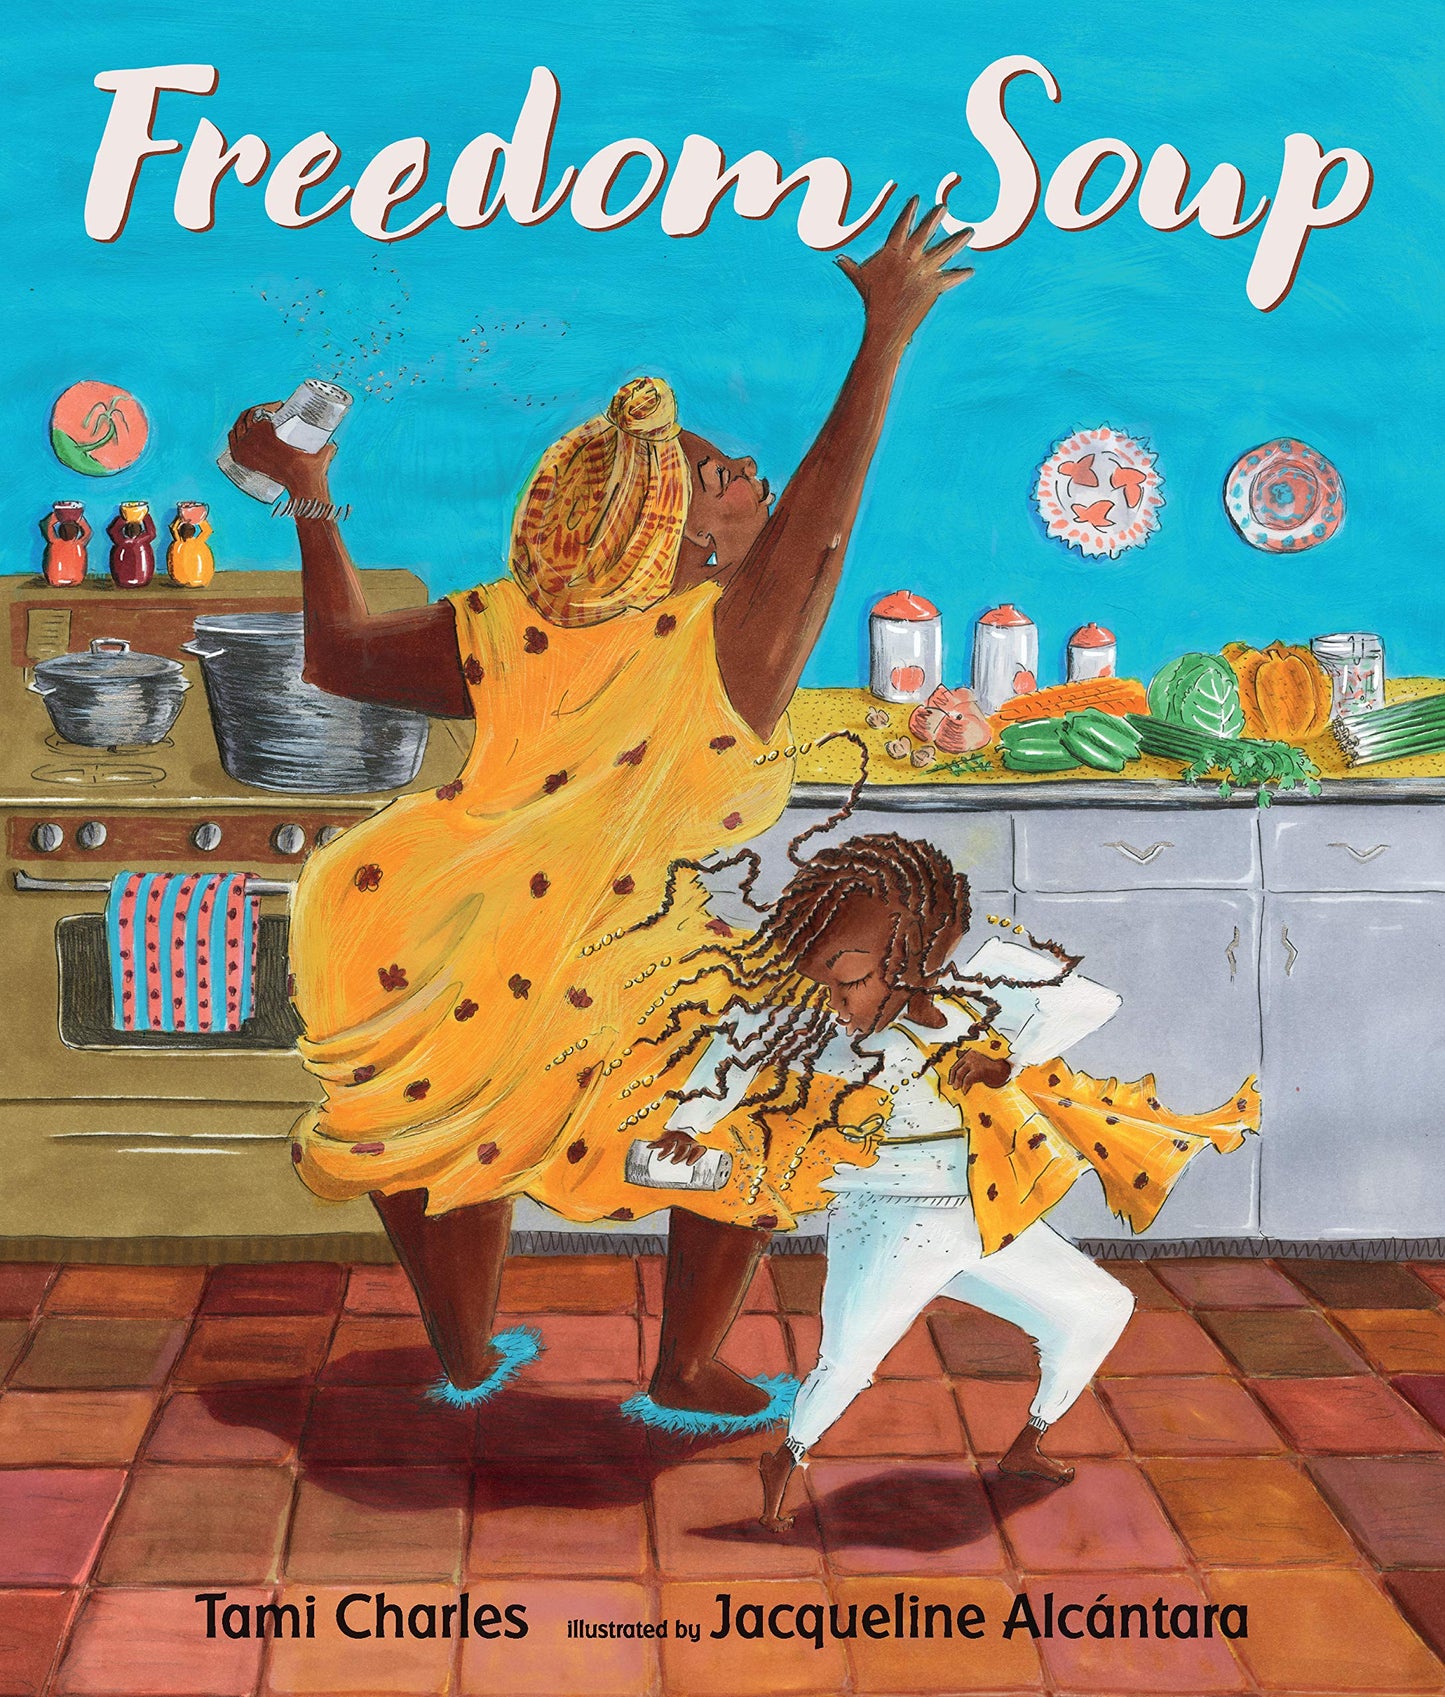 Freedom Soup